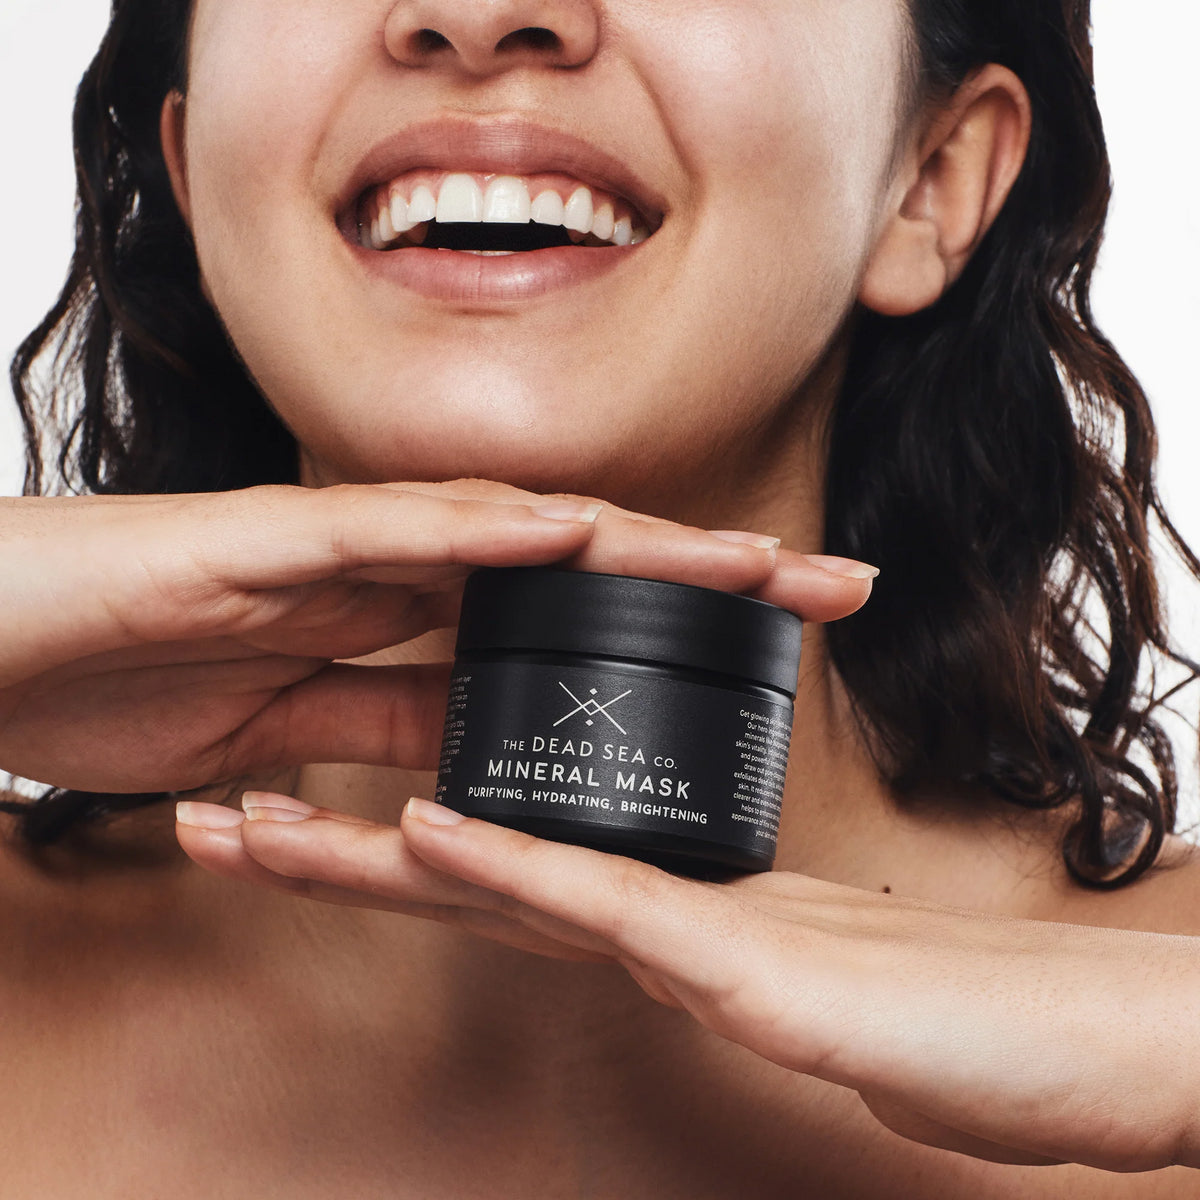 The image shows a woman with a bright smile and clear, dry skin holding The Dead Sea Co's Dead Sea mud mask between her hands. The focus is on the woman's smile and lower half of her face, which is clean and radiant, with no visible blemishes or imperfections as well as the black glass jar containing the Dead Sea mud mask. The packaging has a sleek and elegant appearance, with a minimalist design that exudes a sense of sophistication. The jar is reflective, and the black colour adds a touch of luxury to the overall aesthetic. The overall impression is one of confidence and self-care.